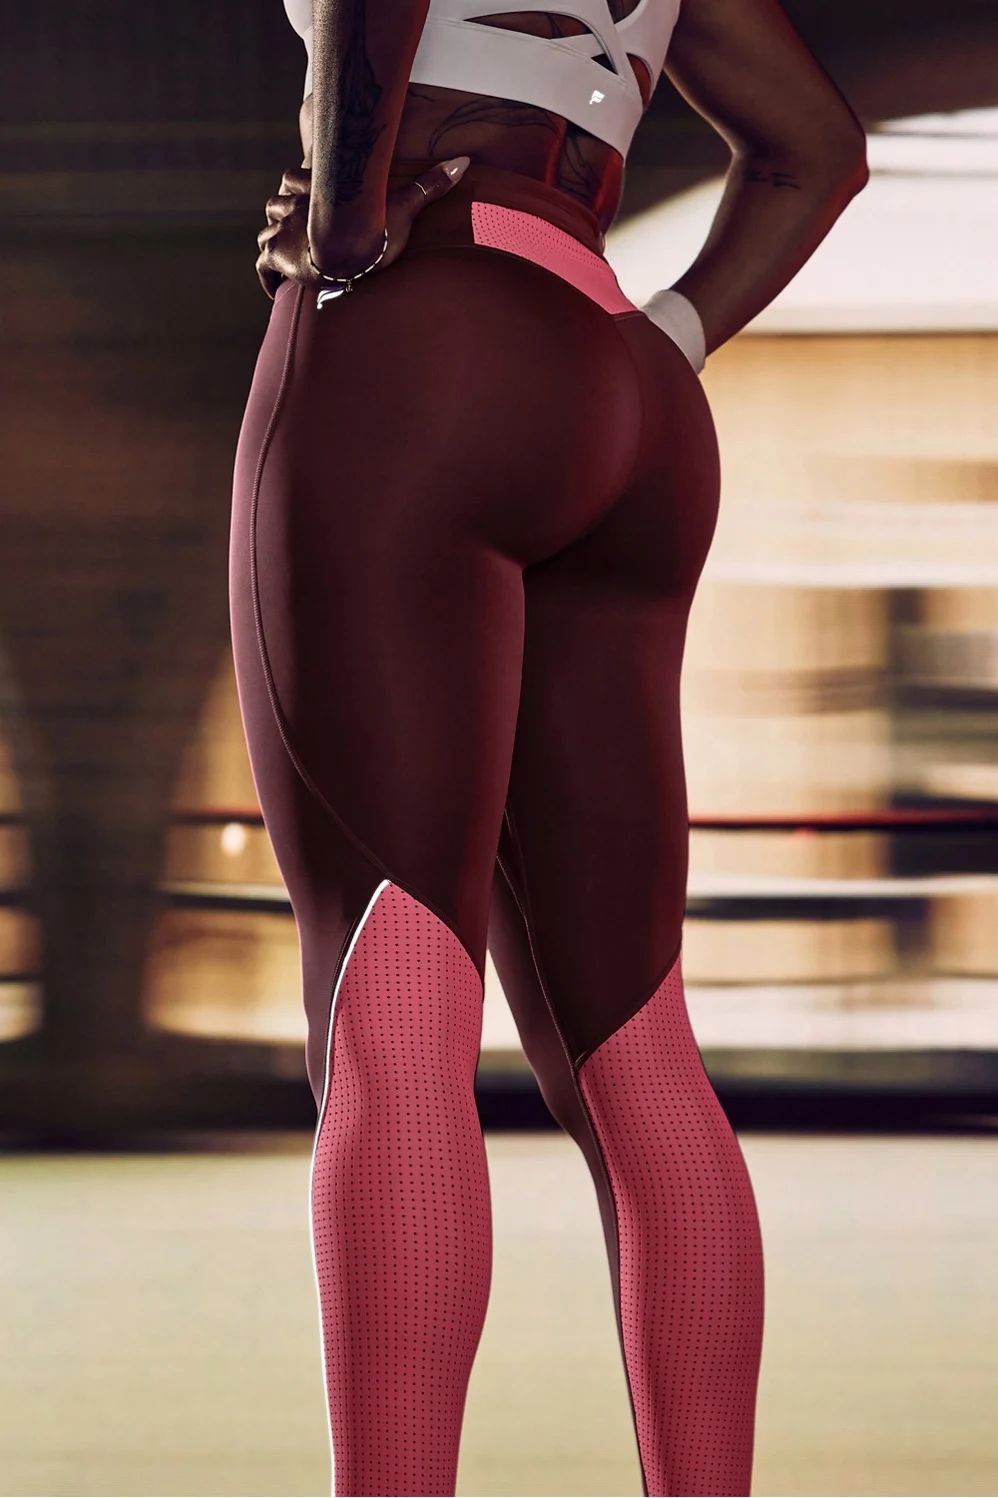 Stride 9 Motion365+ High-Waisted Legging | Fabletics - North America